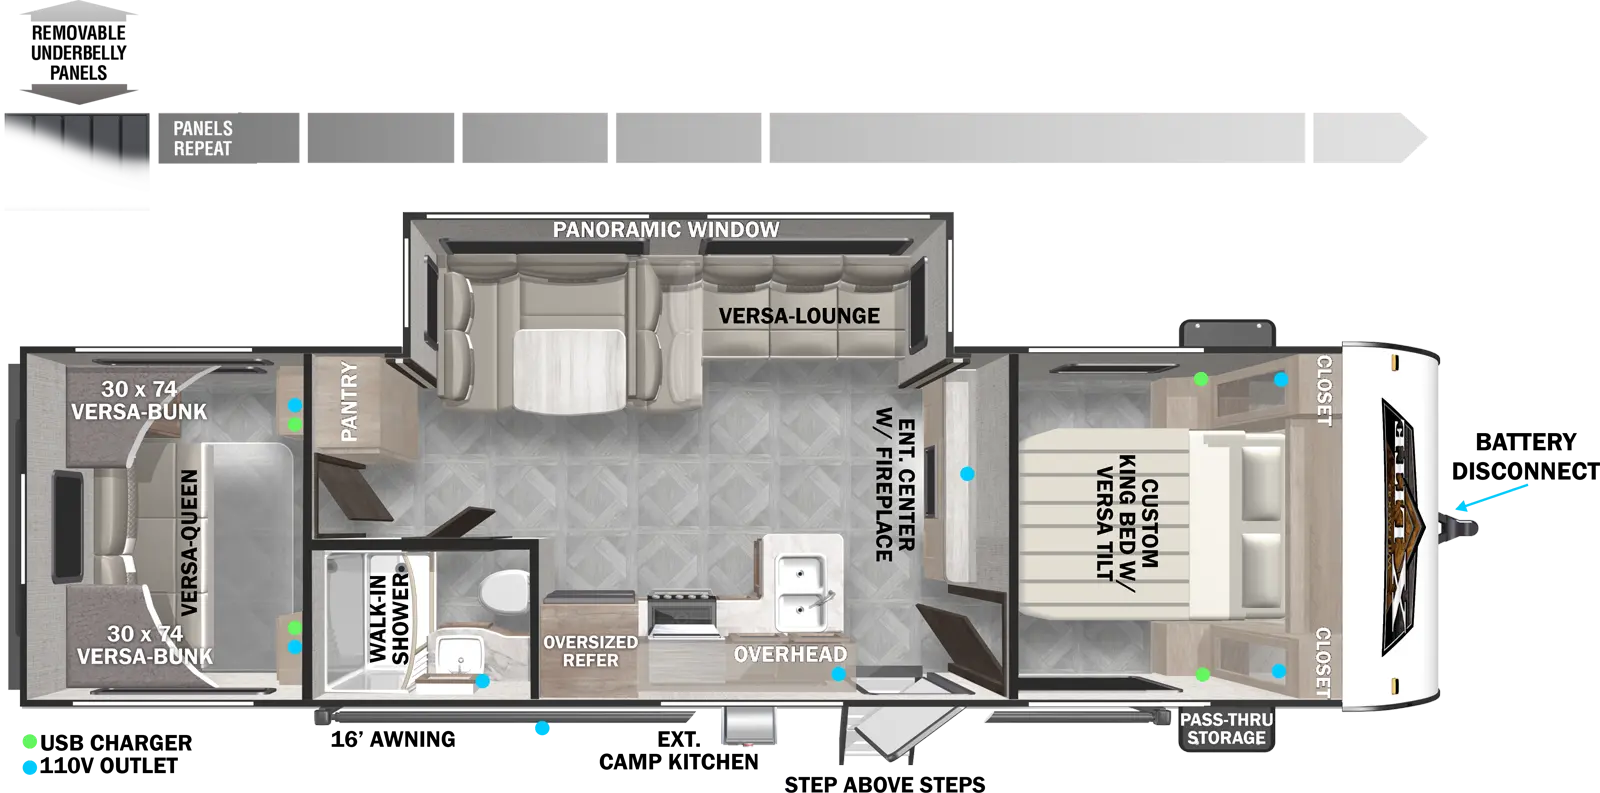 The 28VBXL has one slideout and one entry. Exterior features include a 16 foot awning, exterior camp kitchen, step above entry steps, front pass-thru storage, battery disconnect, and removable underbelly panels. Interior layout front to back: versa-tilt custom king bed with closets on each side; entertainment center with fireplace along inner wall; off-door side slideout with versa lounge/u-dinette and panoramic window; door side entry and kitchen with peninsula countertop with sink, overhead cabinet, and oversized refrigerator; door side full bathroom with walk-in shower; off-door side pantry along inner wall; rear bunk room with versa bunks on each side above a versa queen.